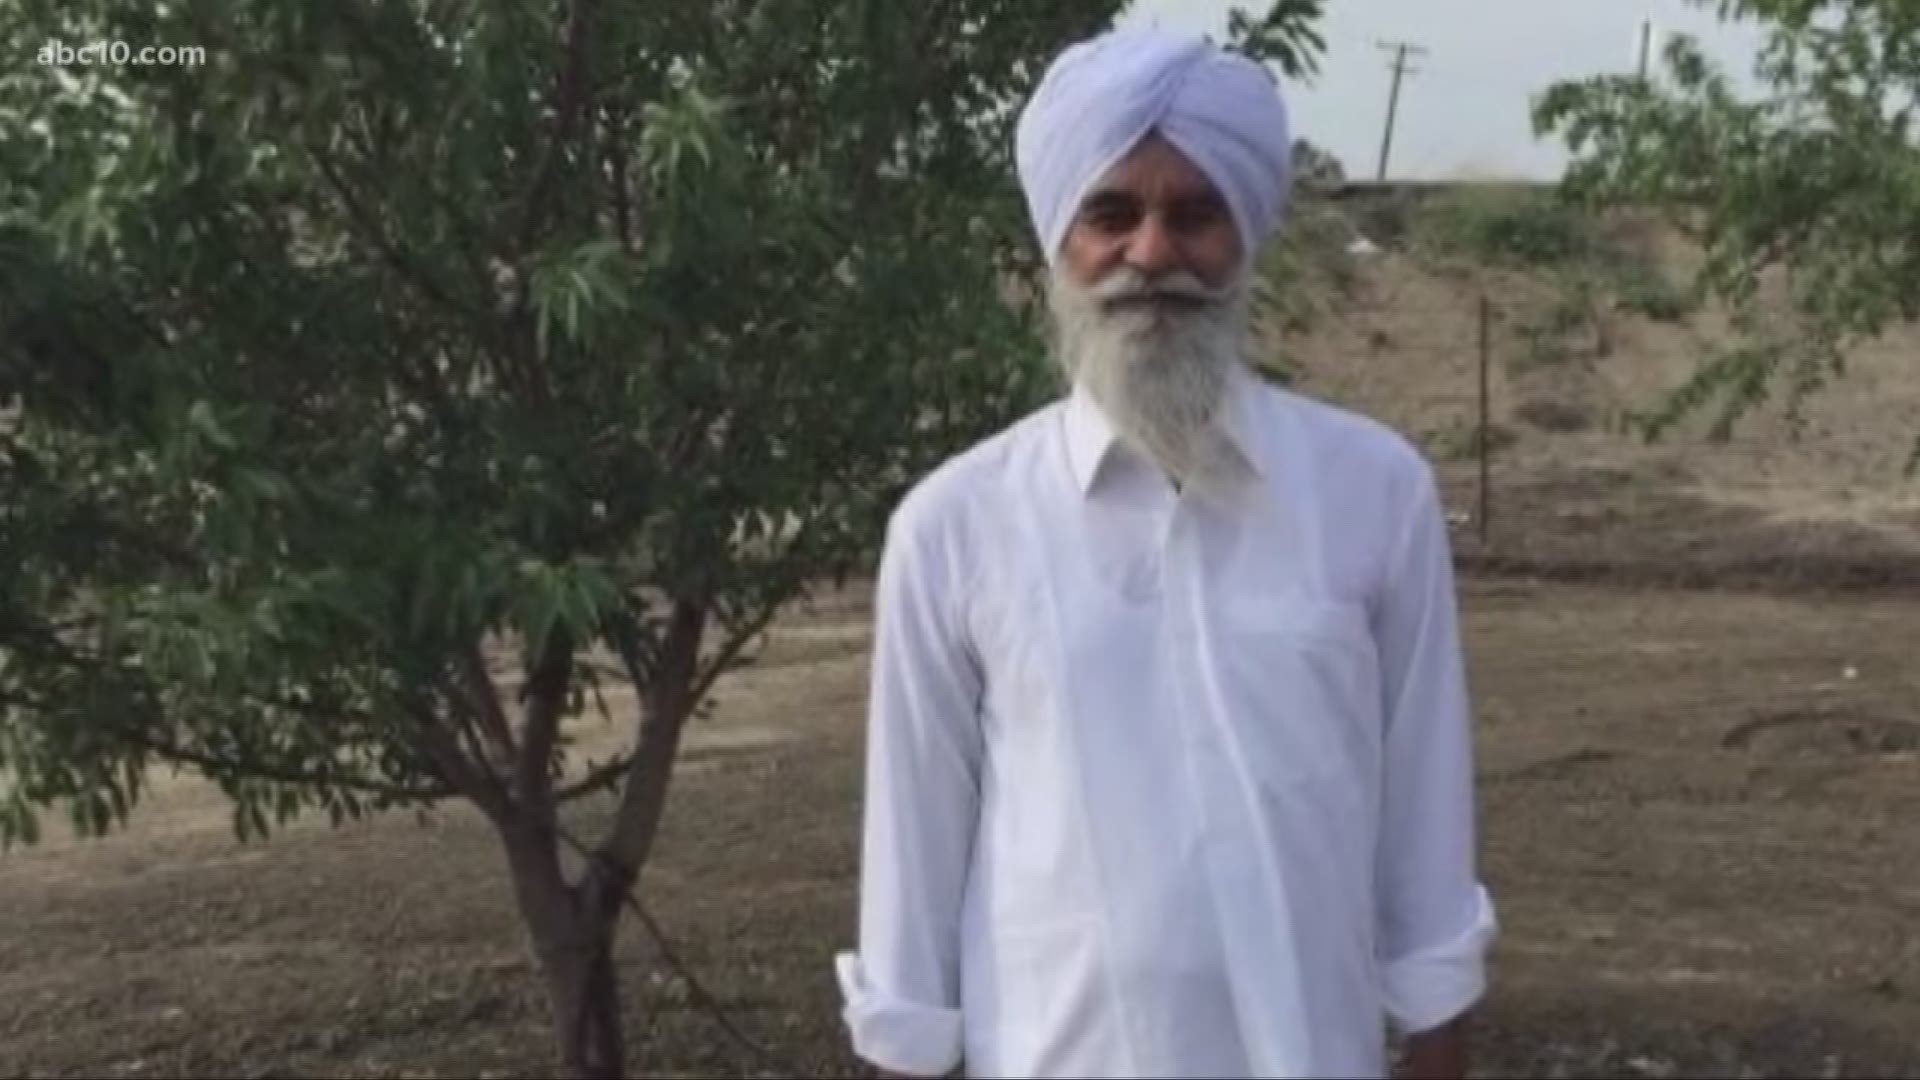 Last night, the Tracy community held a candlelight viigl remembering Parmjit Singh, a 64-year-old Sikh man who was stabbed to death while on his evening walk. Watch #MorningBlend10 weekdays at 5-7 a.m. for everything you need to know to start your day.